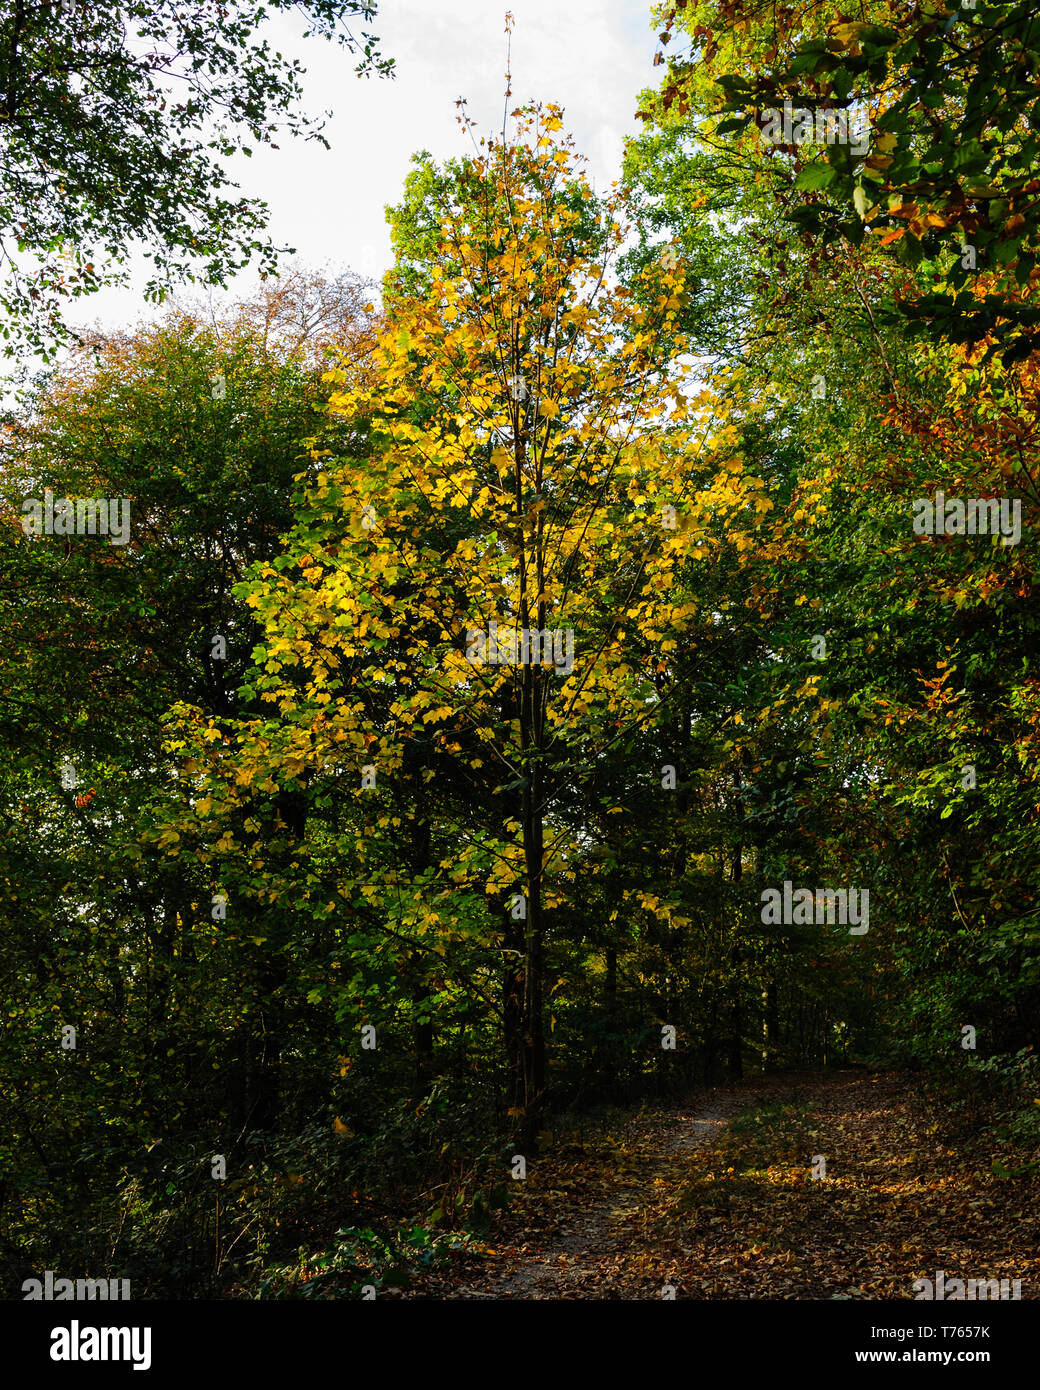 Beautiful and colourfull Autumn leafs in germanies deep forests captured on a bautiful autumn day with rich contrasts Stock Photo